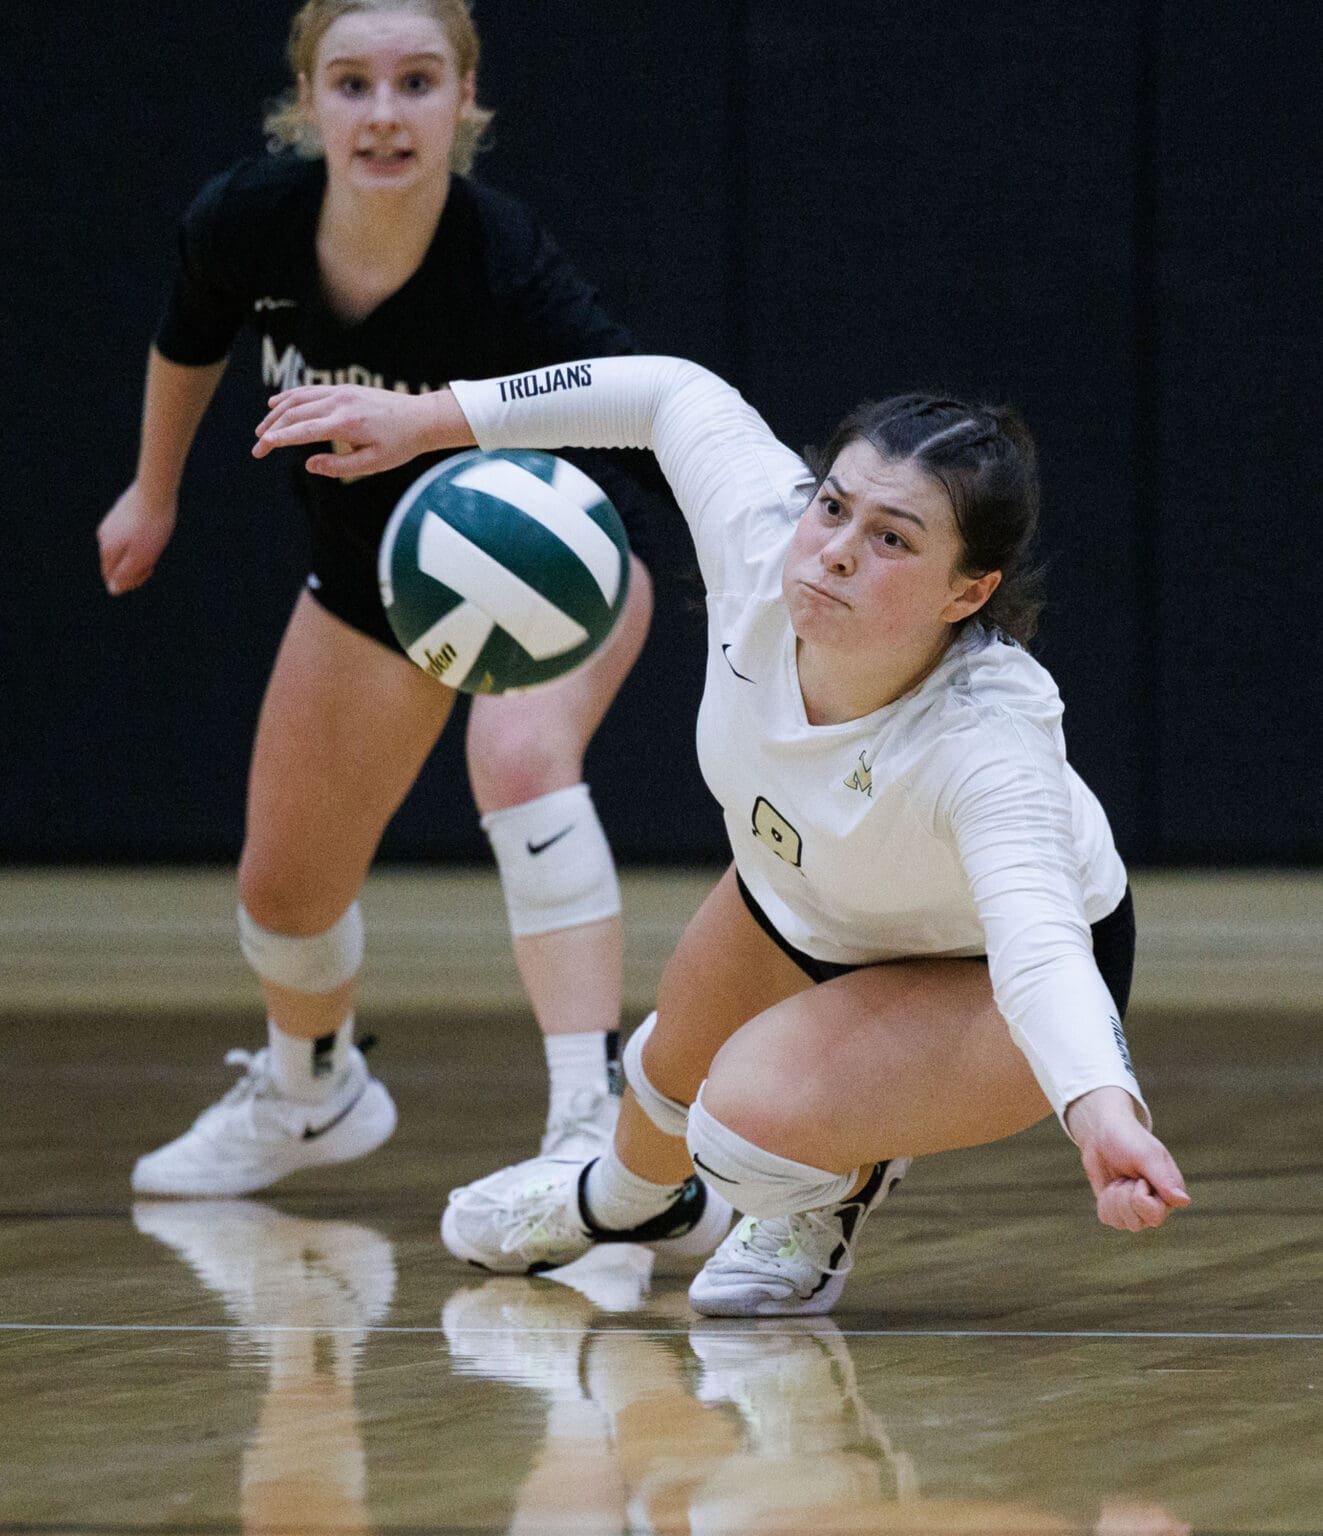 Meridian's Avery Neal dives and falls for the ball as her teammate reacts behind her.